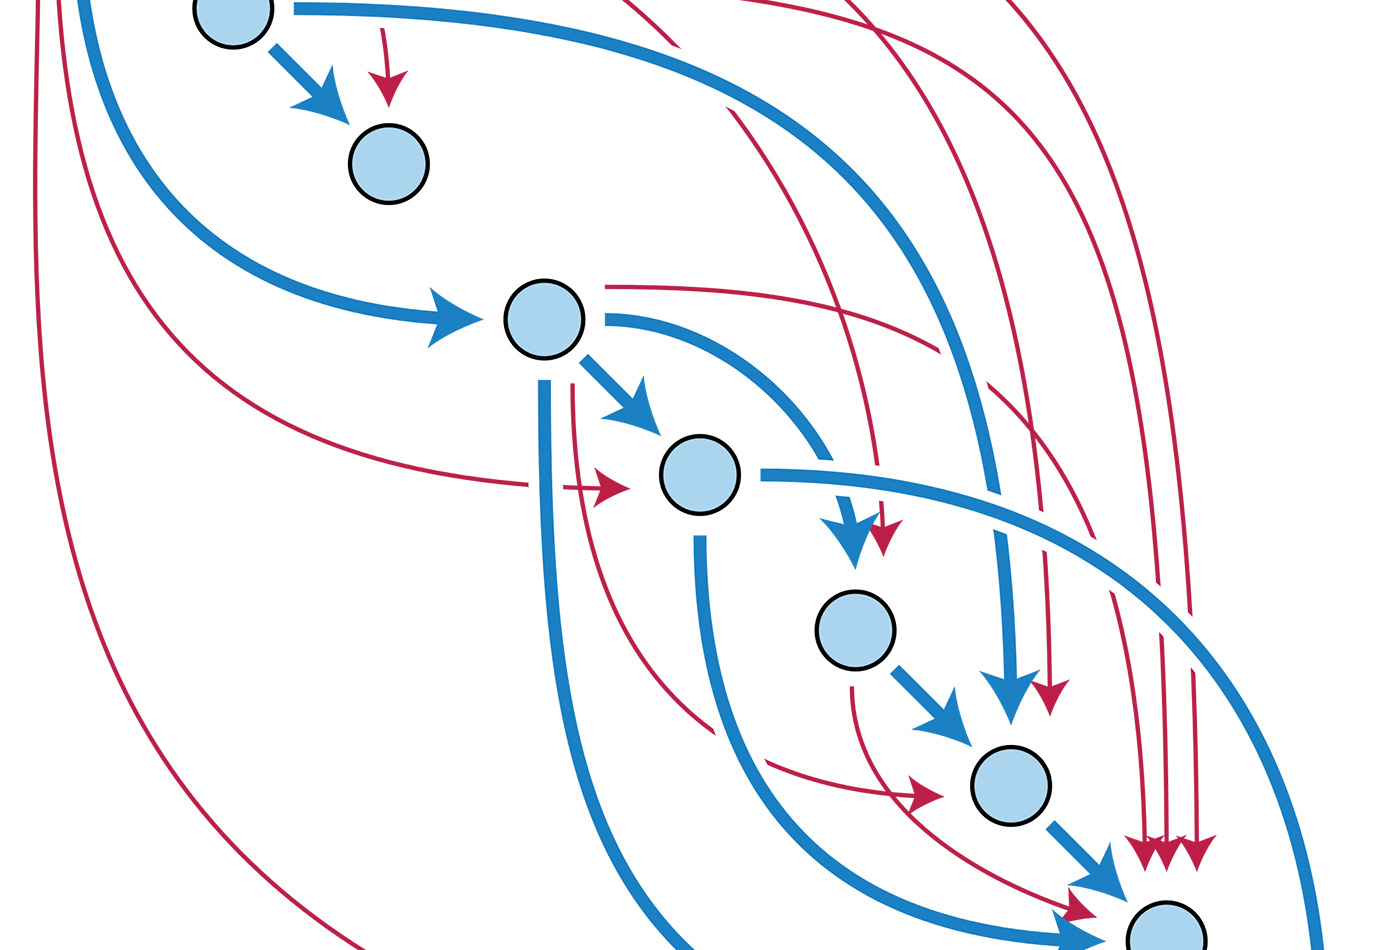 The transitive closure of a directed acyclic graph.